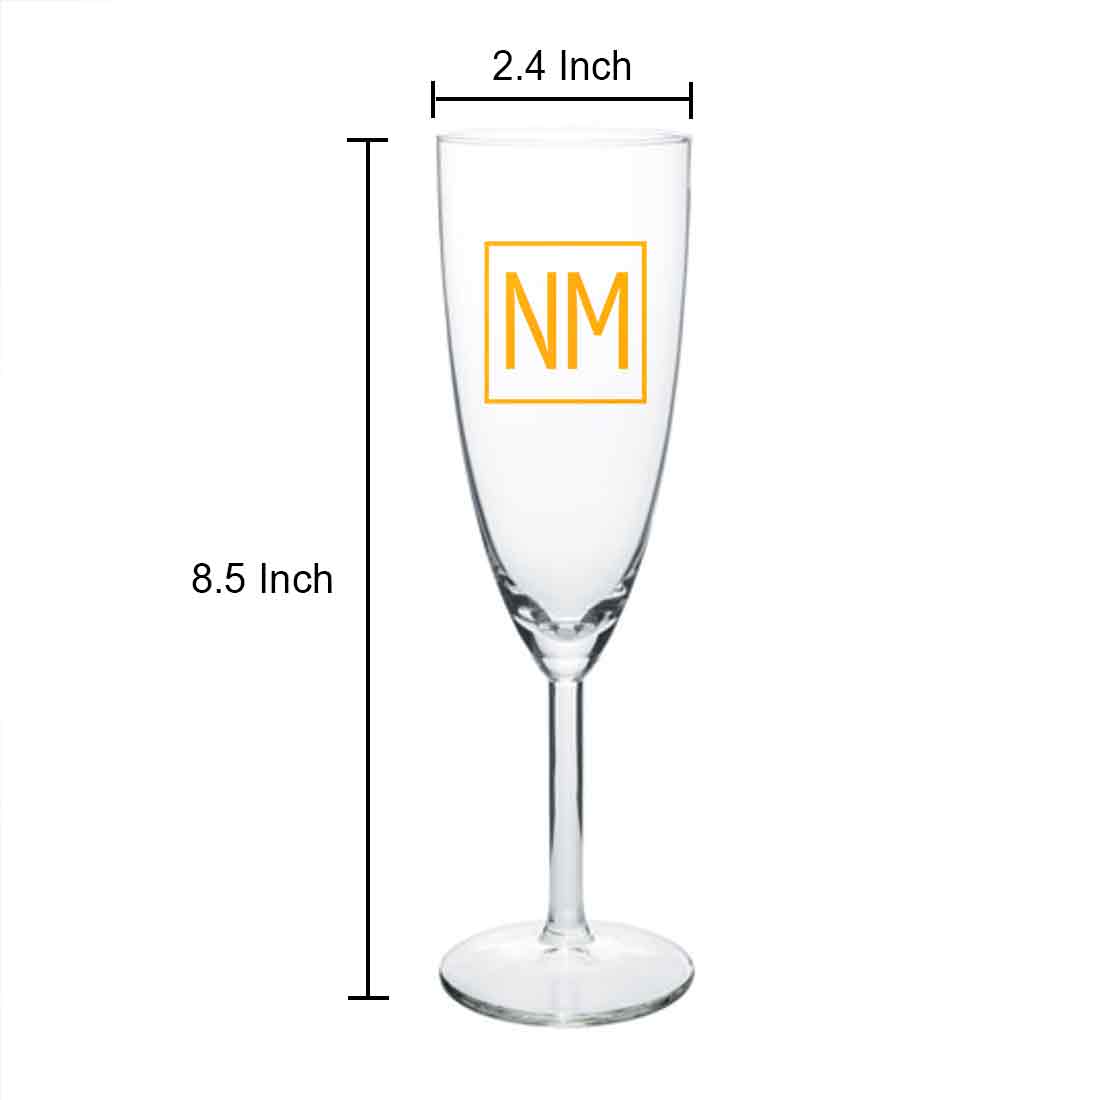 Personalised Unique Champagne Flutes Anniversary Gift for Husband - Initials Monogram